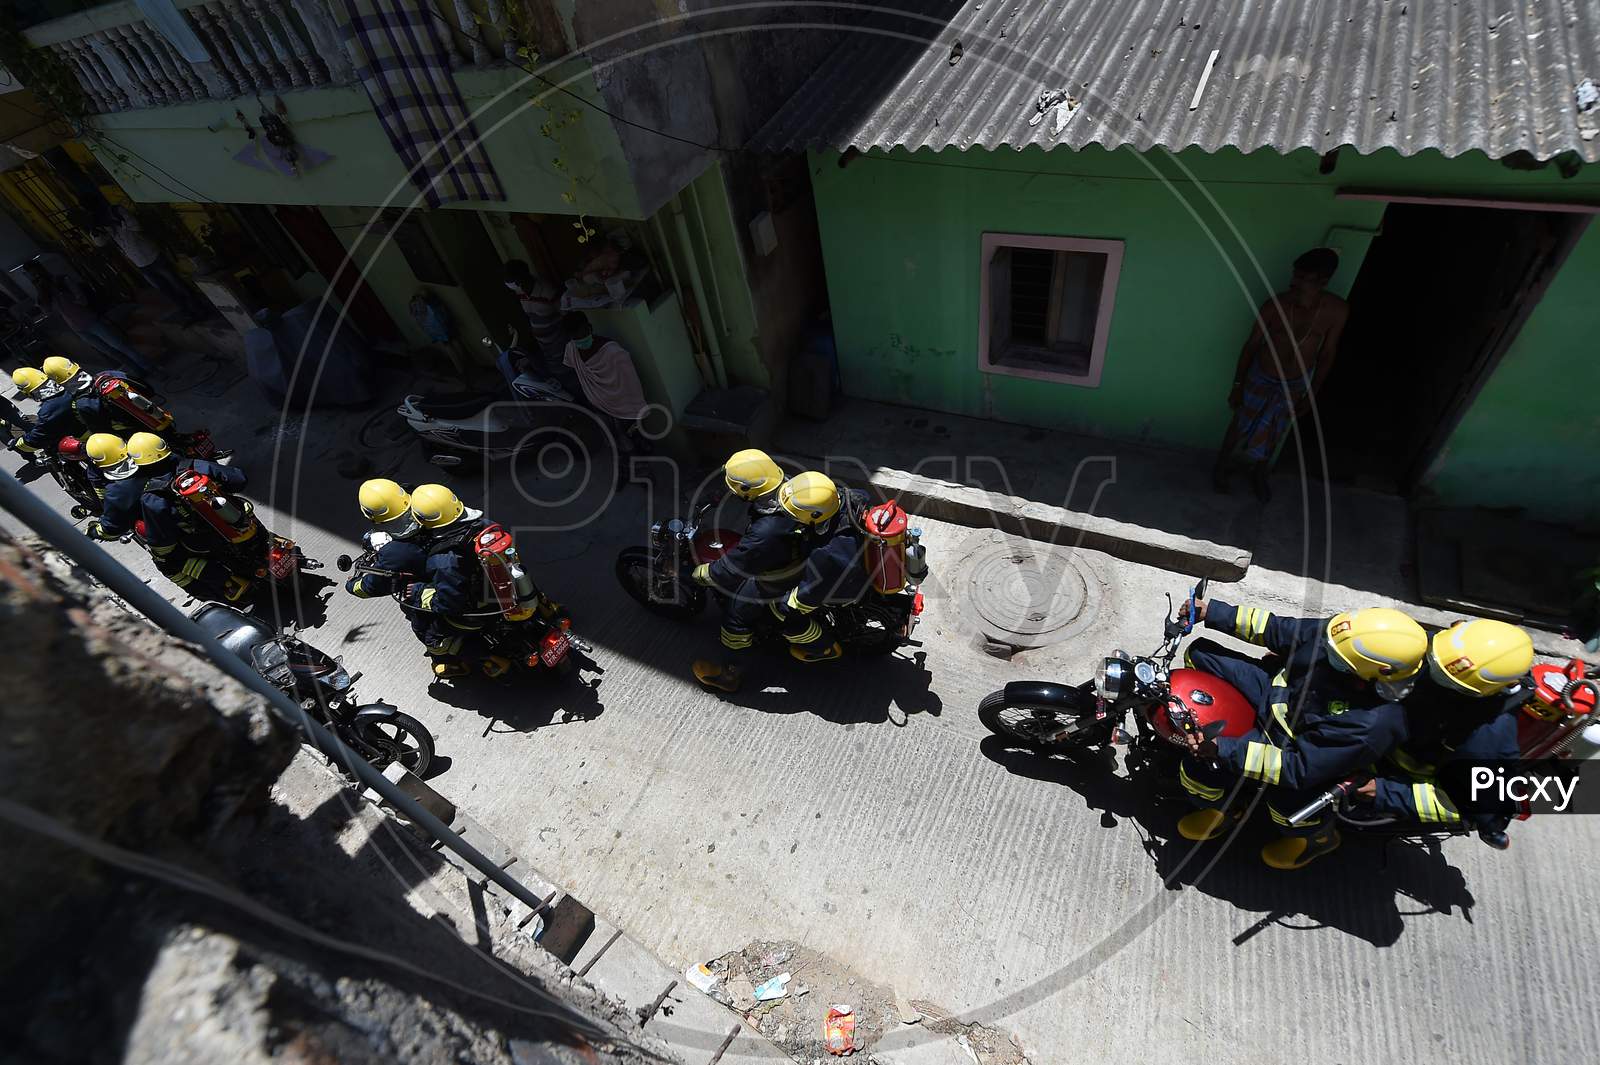 Firefighters on motorbikes equipped with disinfectants ride their way through a containment zone during the lockdown in Chennai on July 04, 2020.